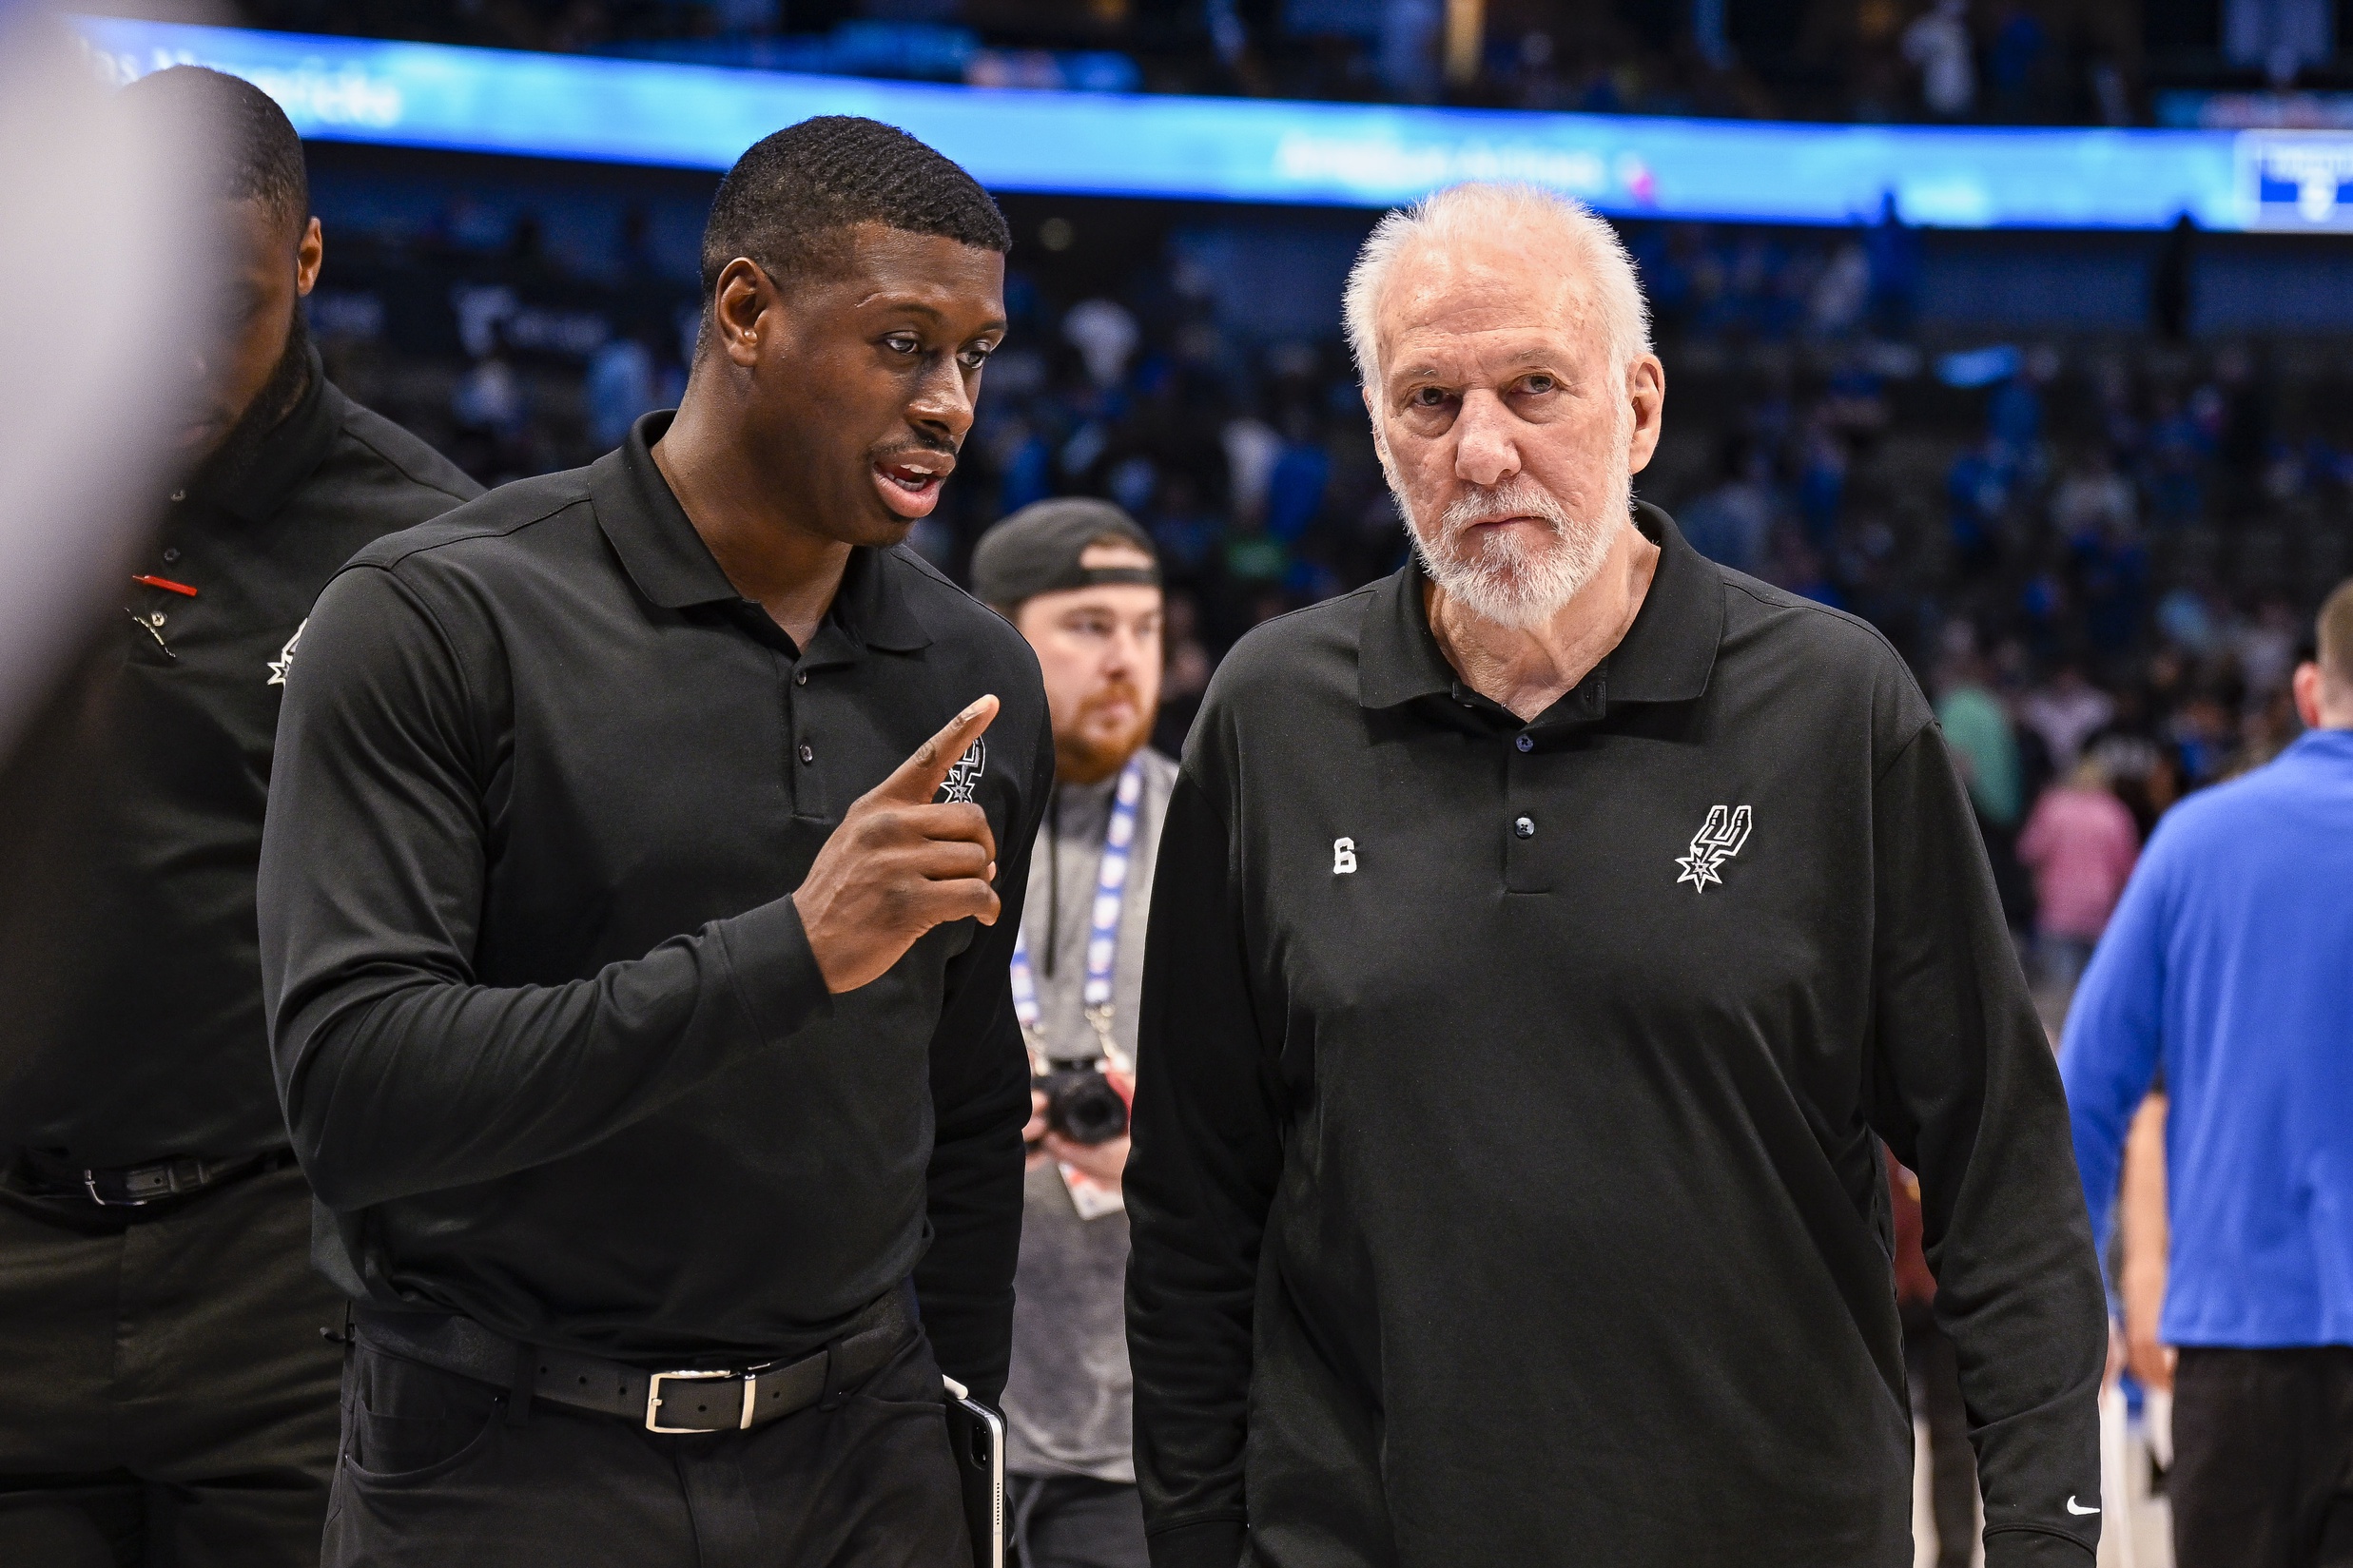 Gregg Popovich signed a massive deal with the Spurs. He will be the coach for 5 more years.